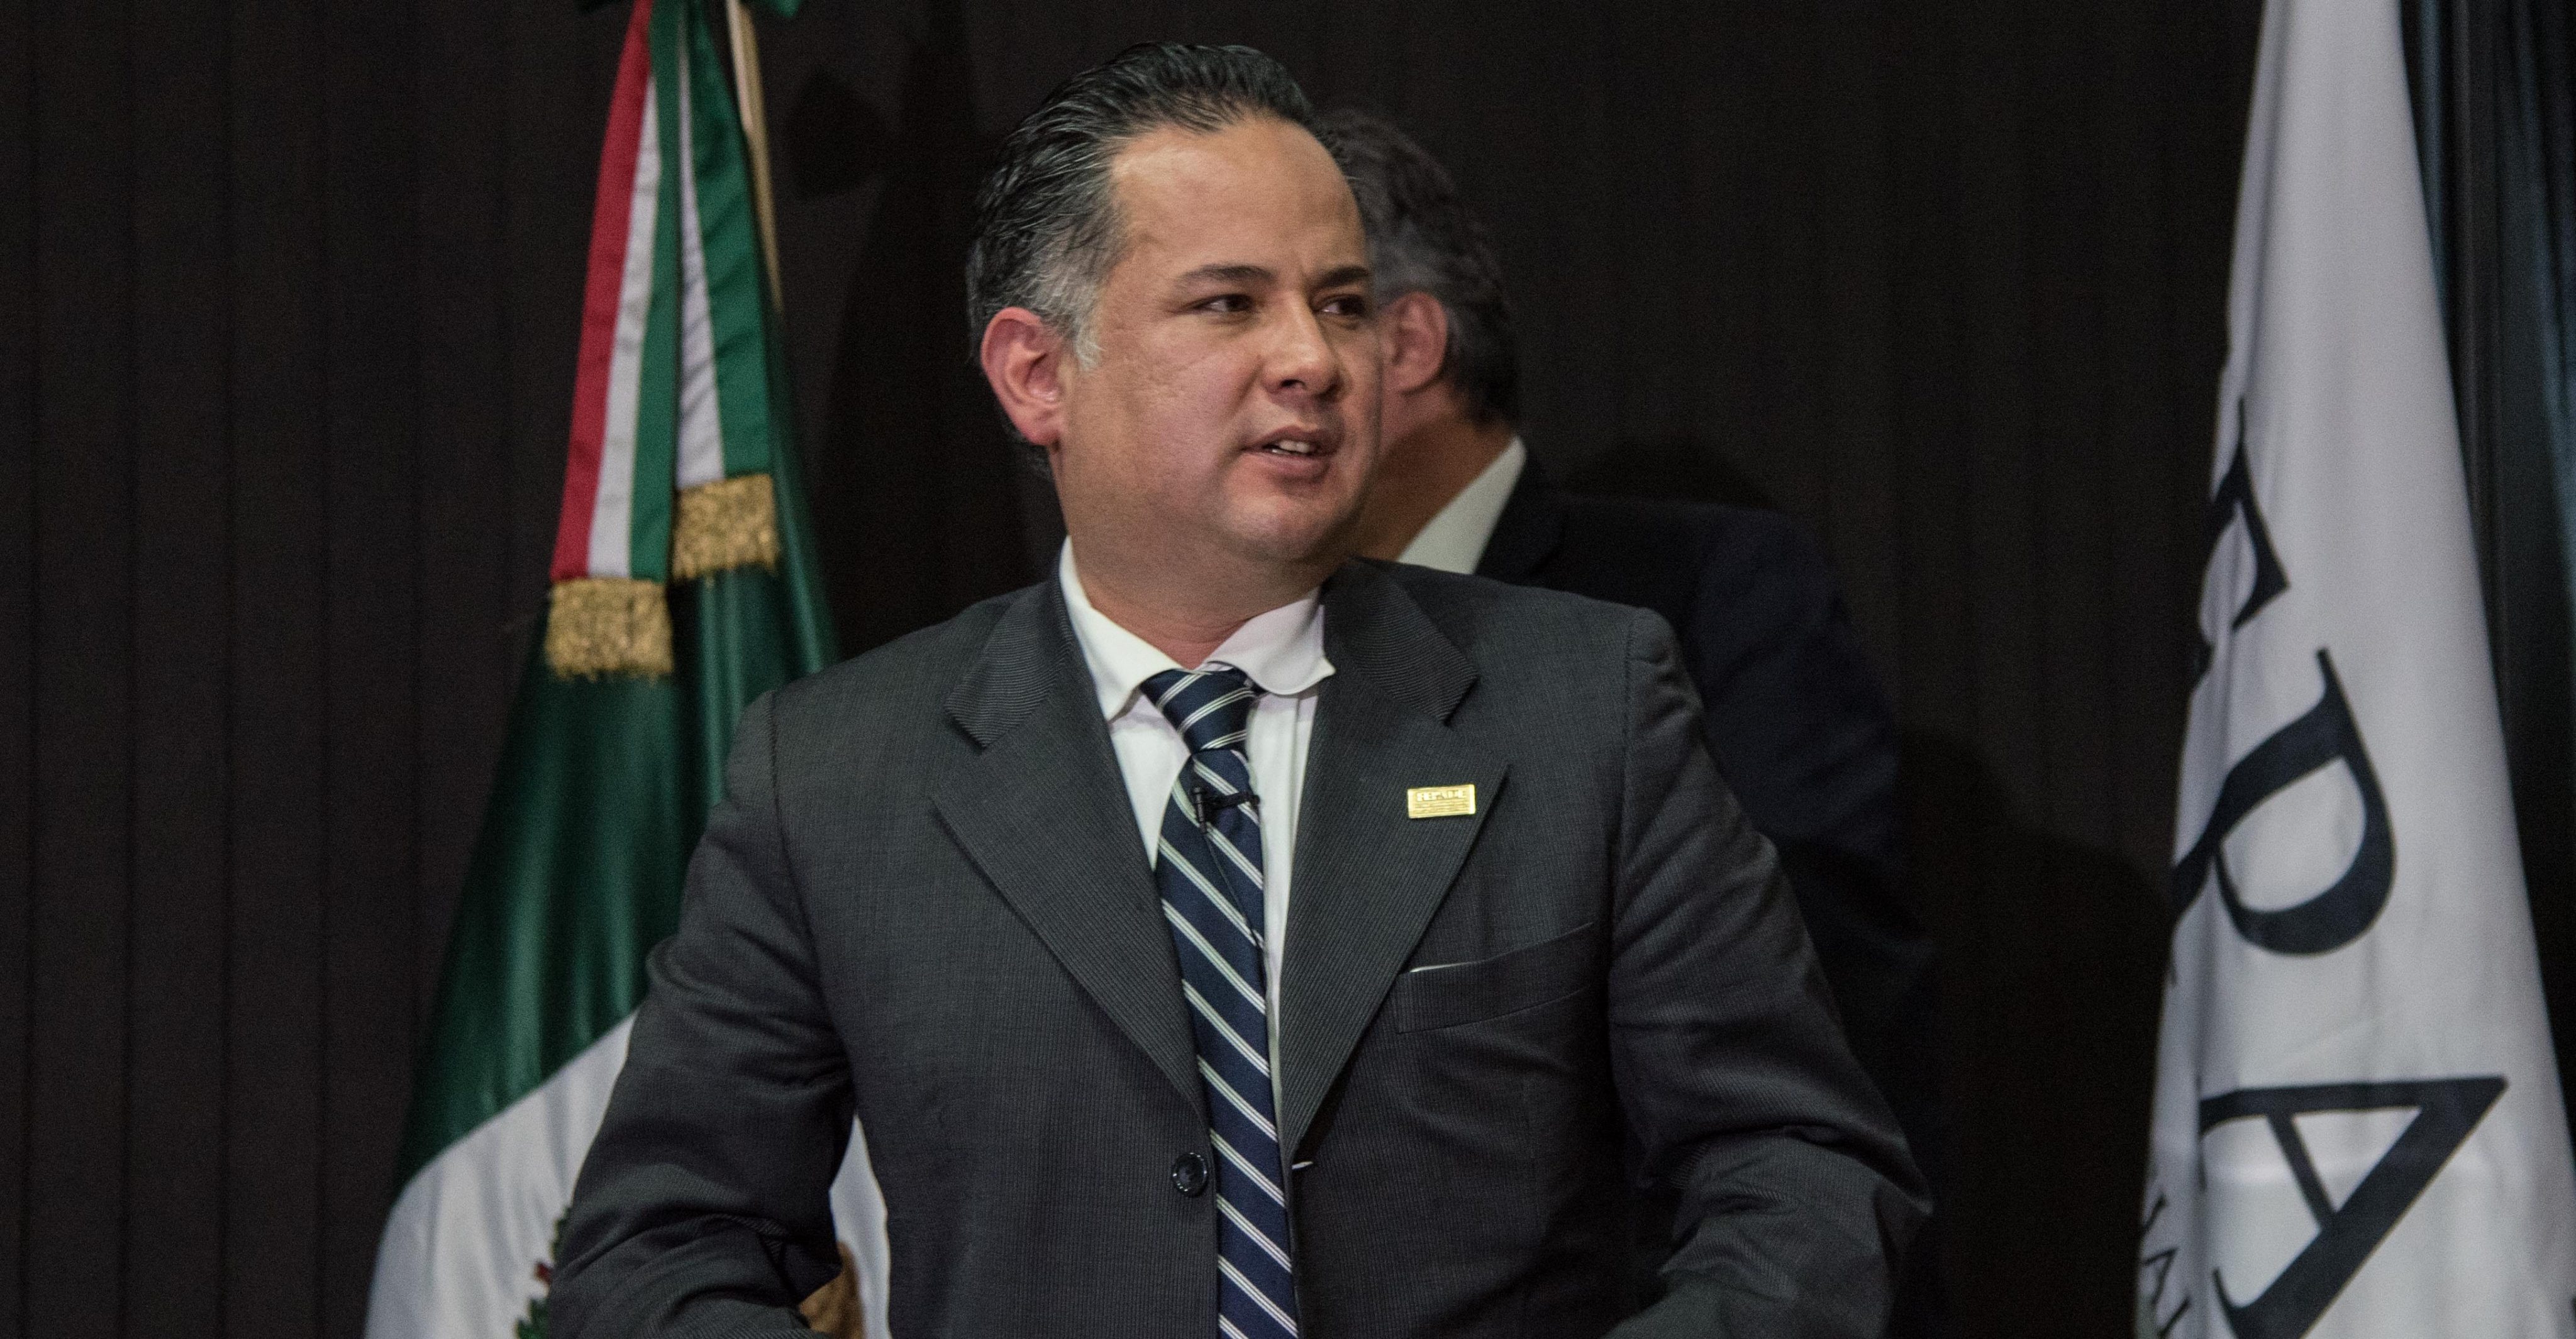 Santiago Nieto will be responsible for investigations of laundering of money